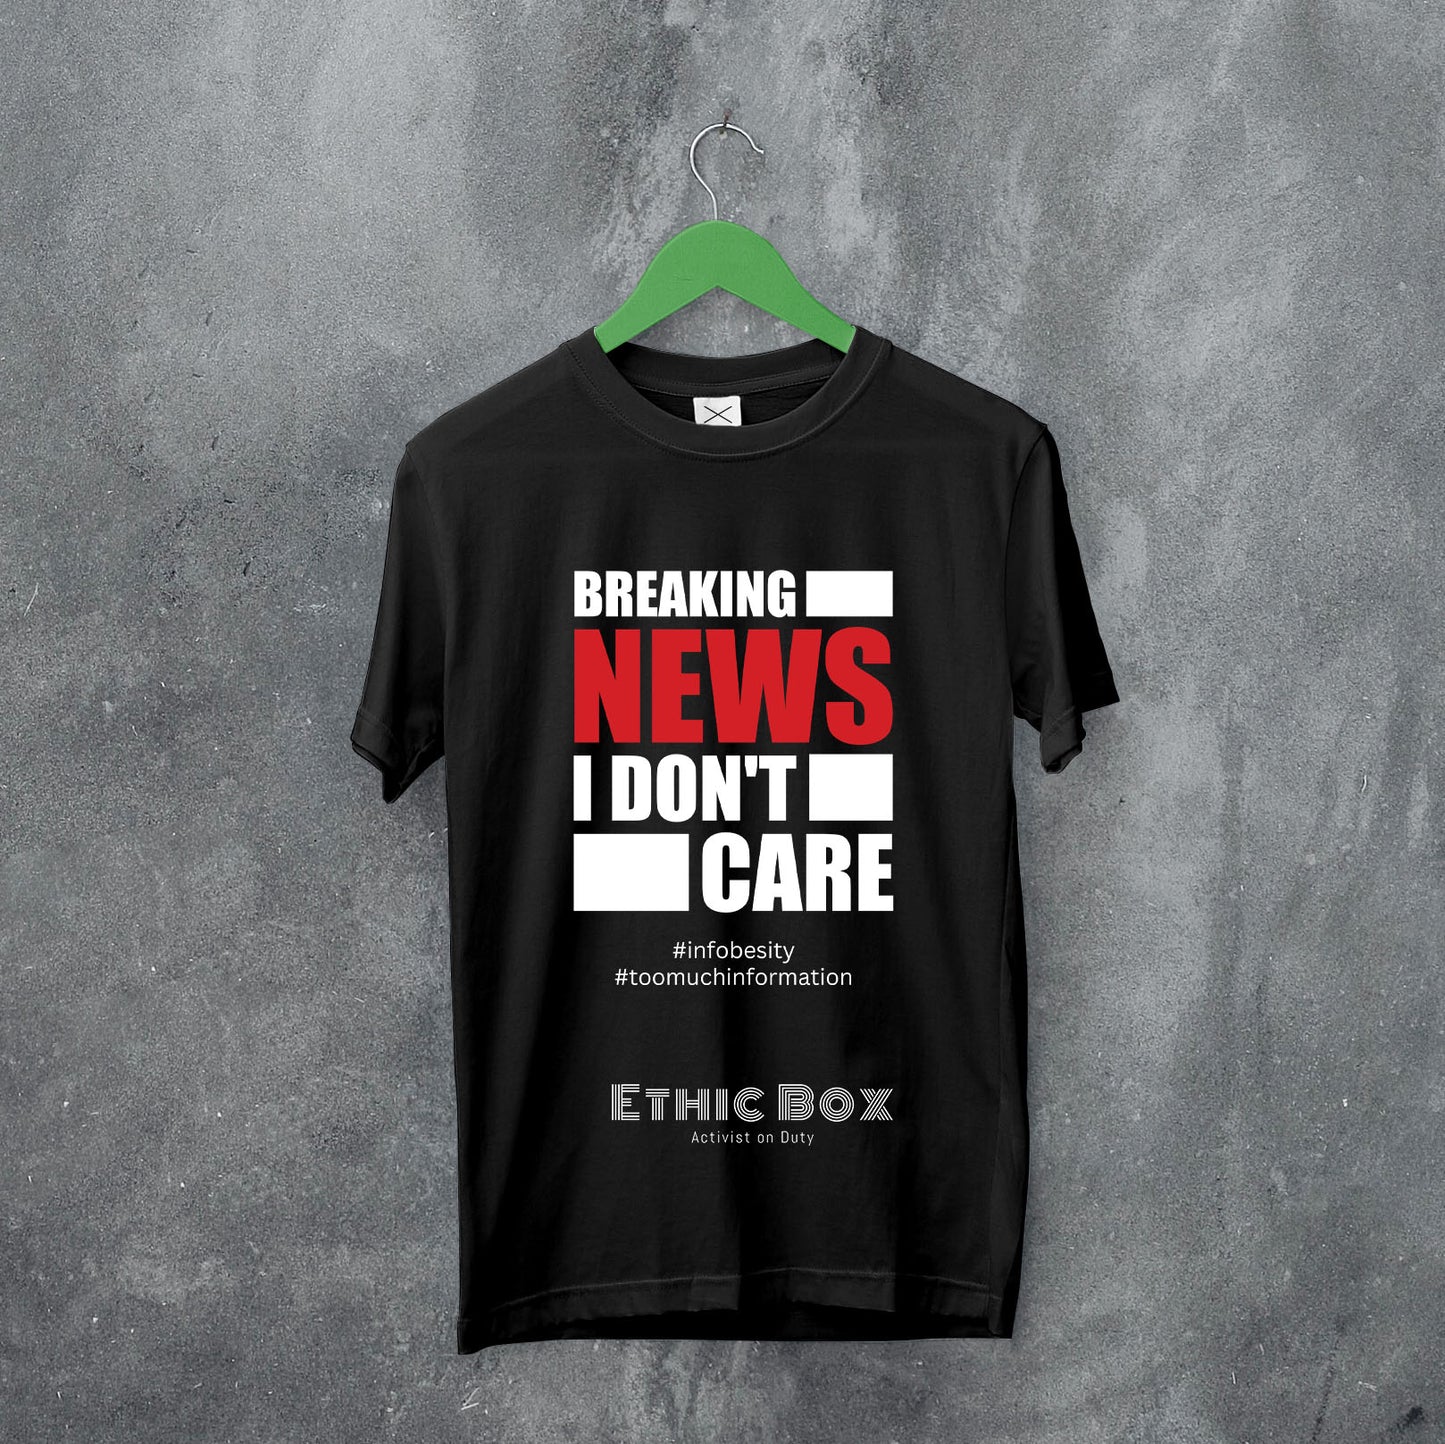 Breaking news - I don't care - Unisex fit